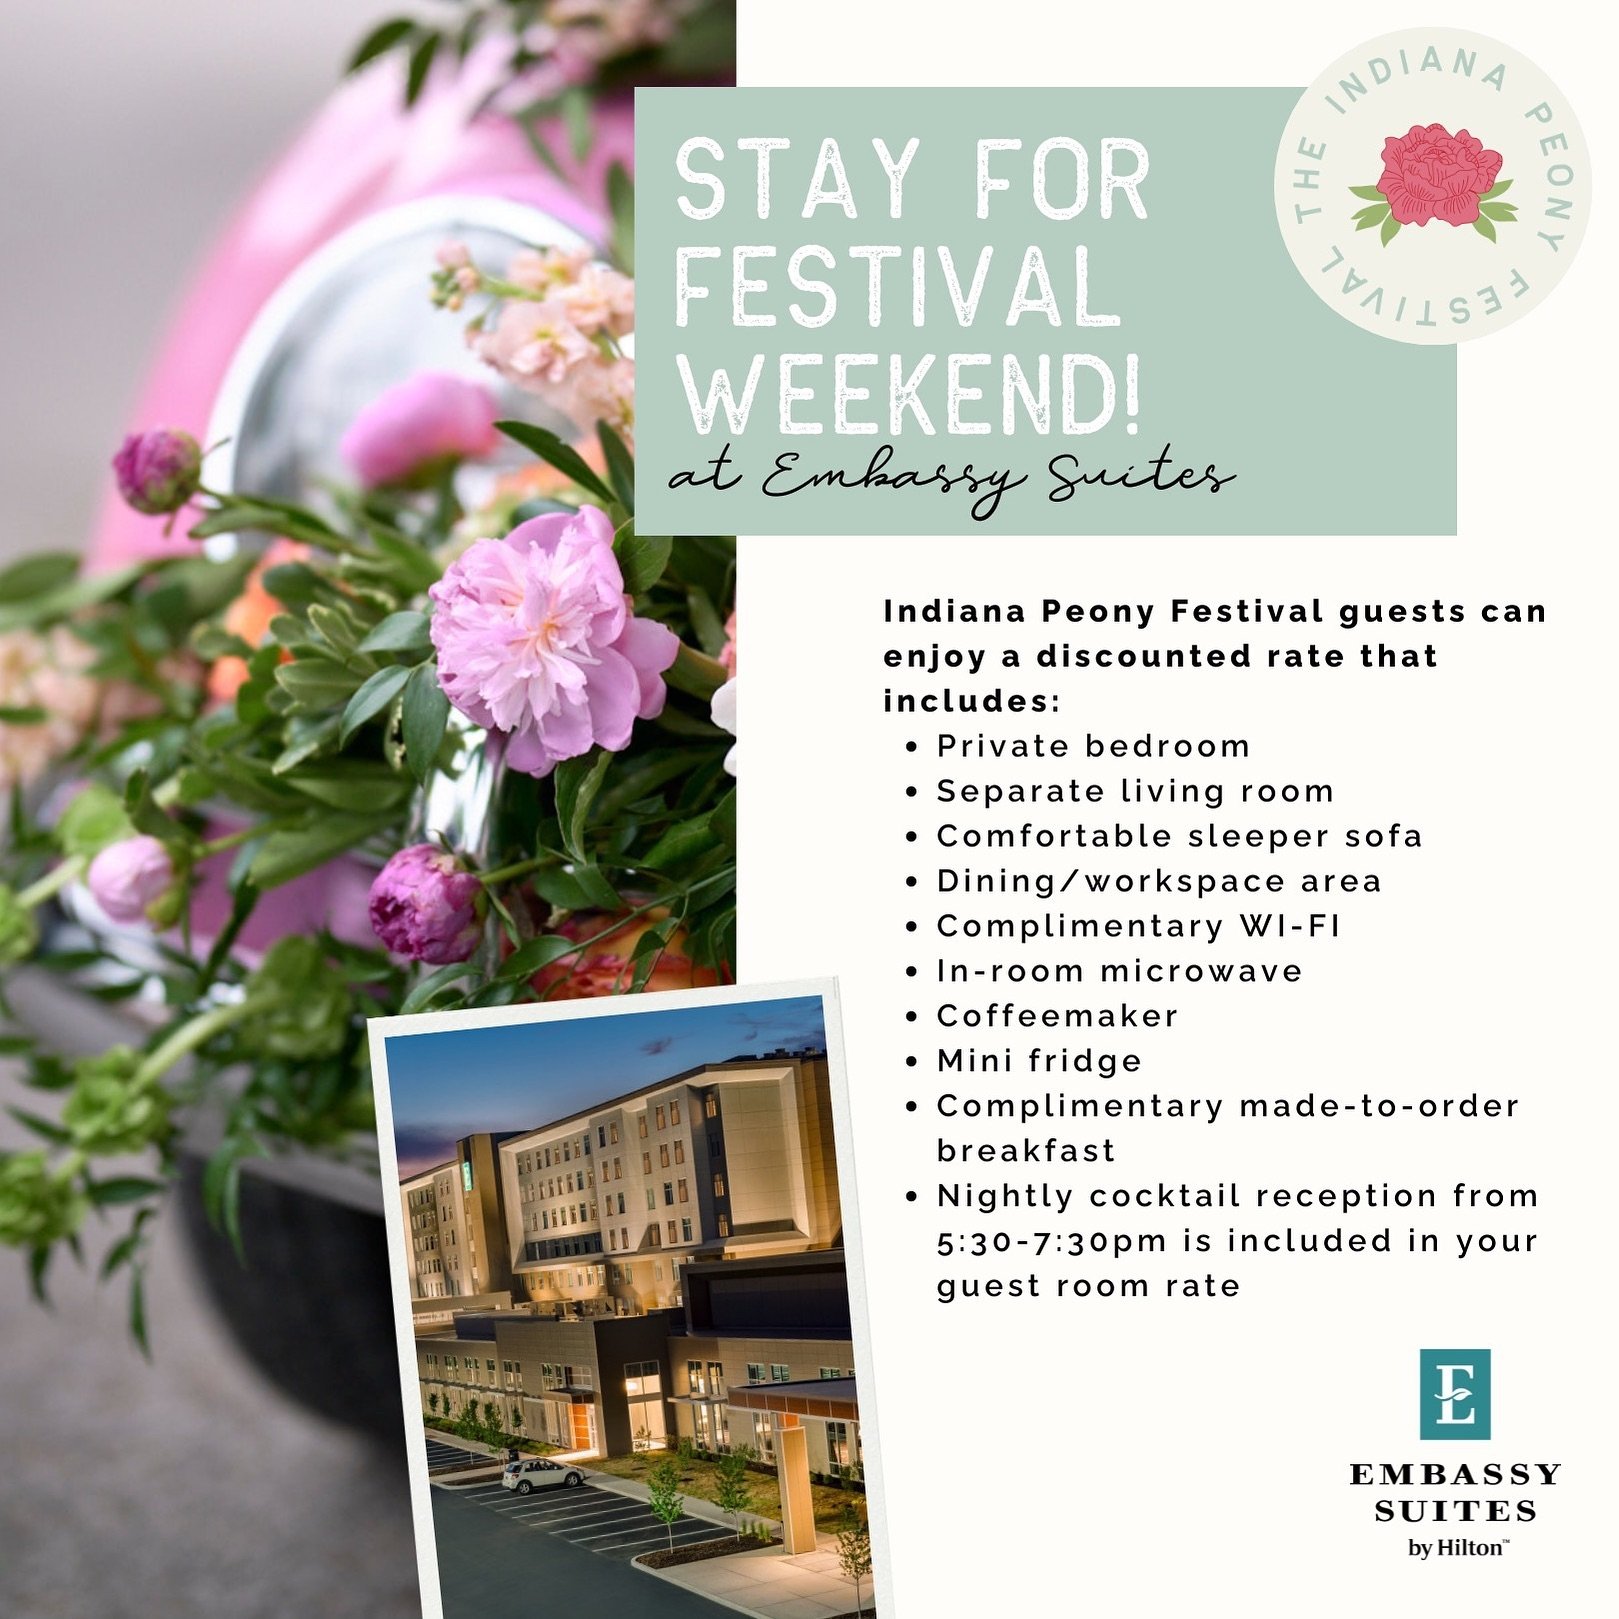 Stay a while! Make it a weekend in @noblesvillein with a discounted rate at the Embassy Suites! Give them a call at 317-674-1900 or book via the link in our bio for a discounted Saturday night rate on a private bedroom with lots of perks🛌🌸🥂🛋 Than